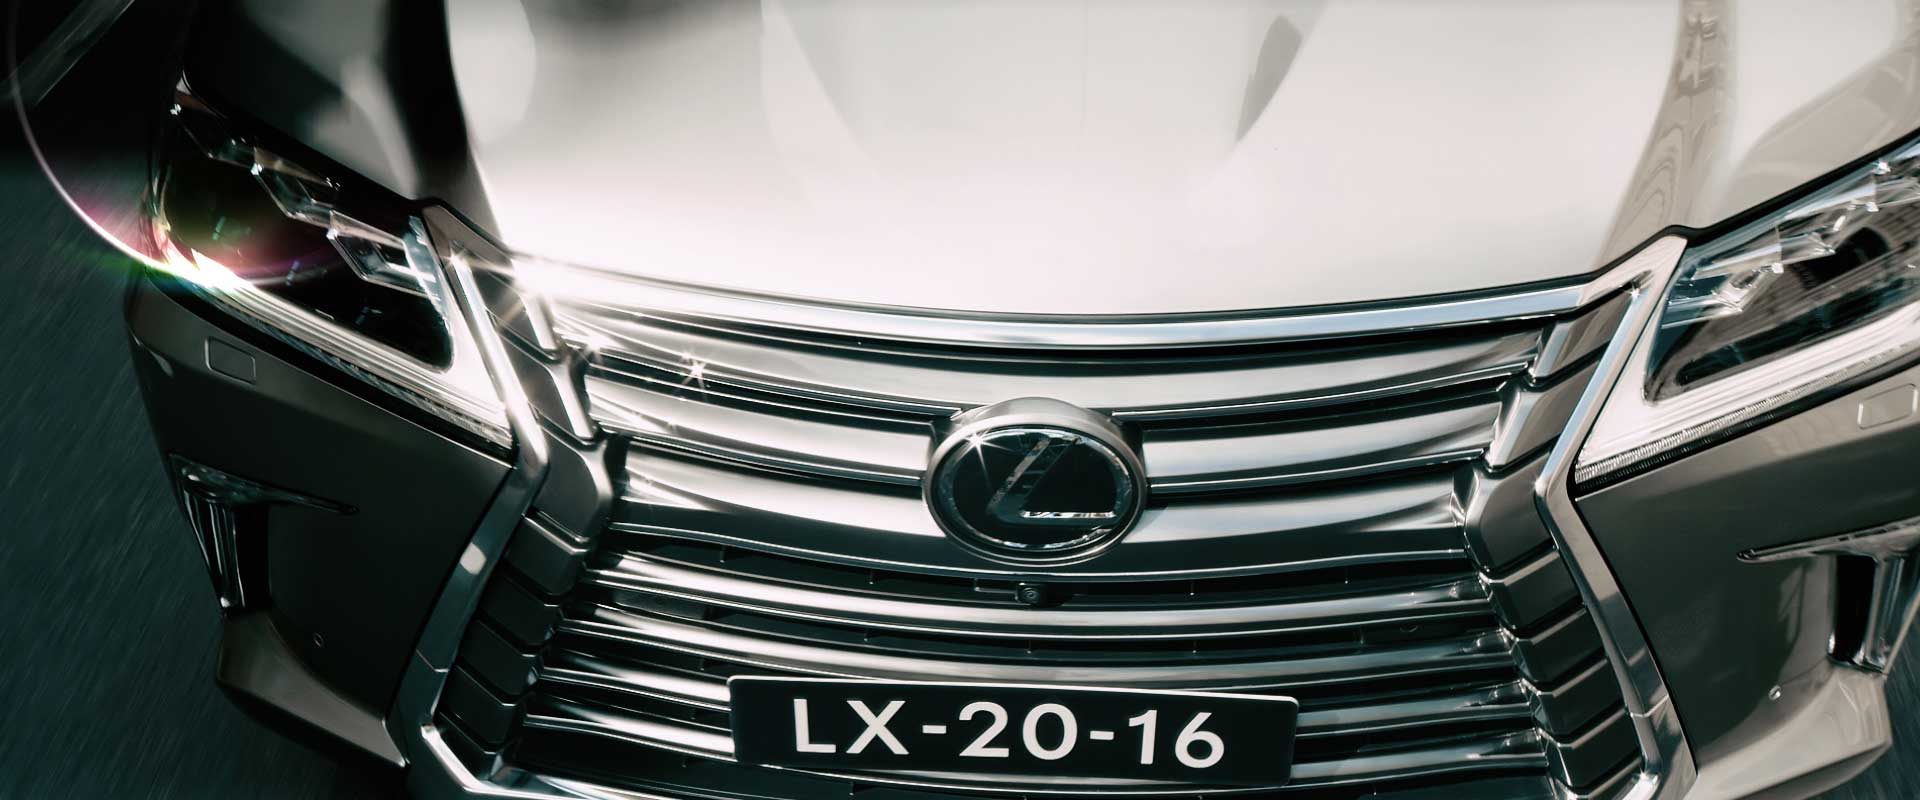 Frontview detail. Still from Lexus LX2016 Commercial.